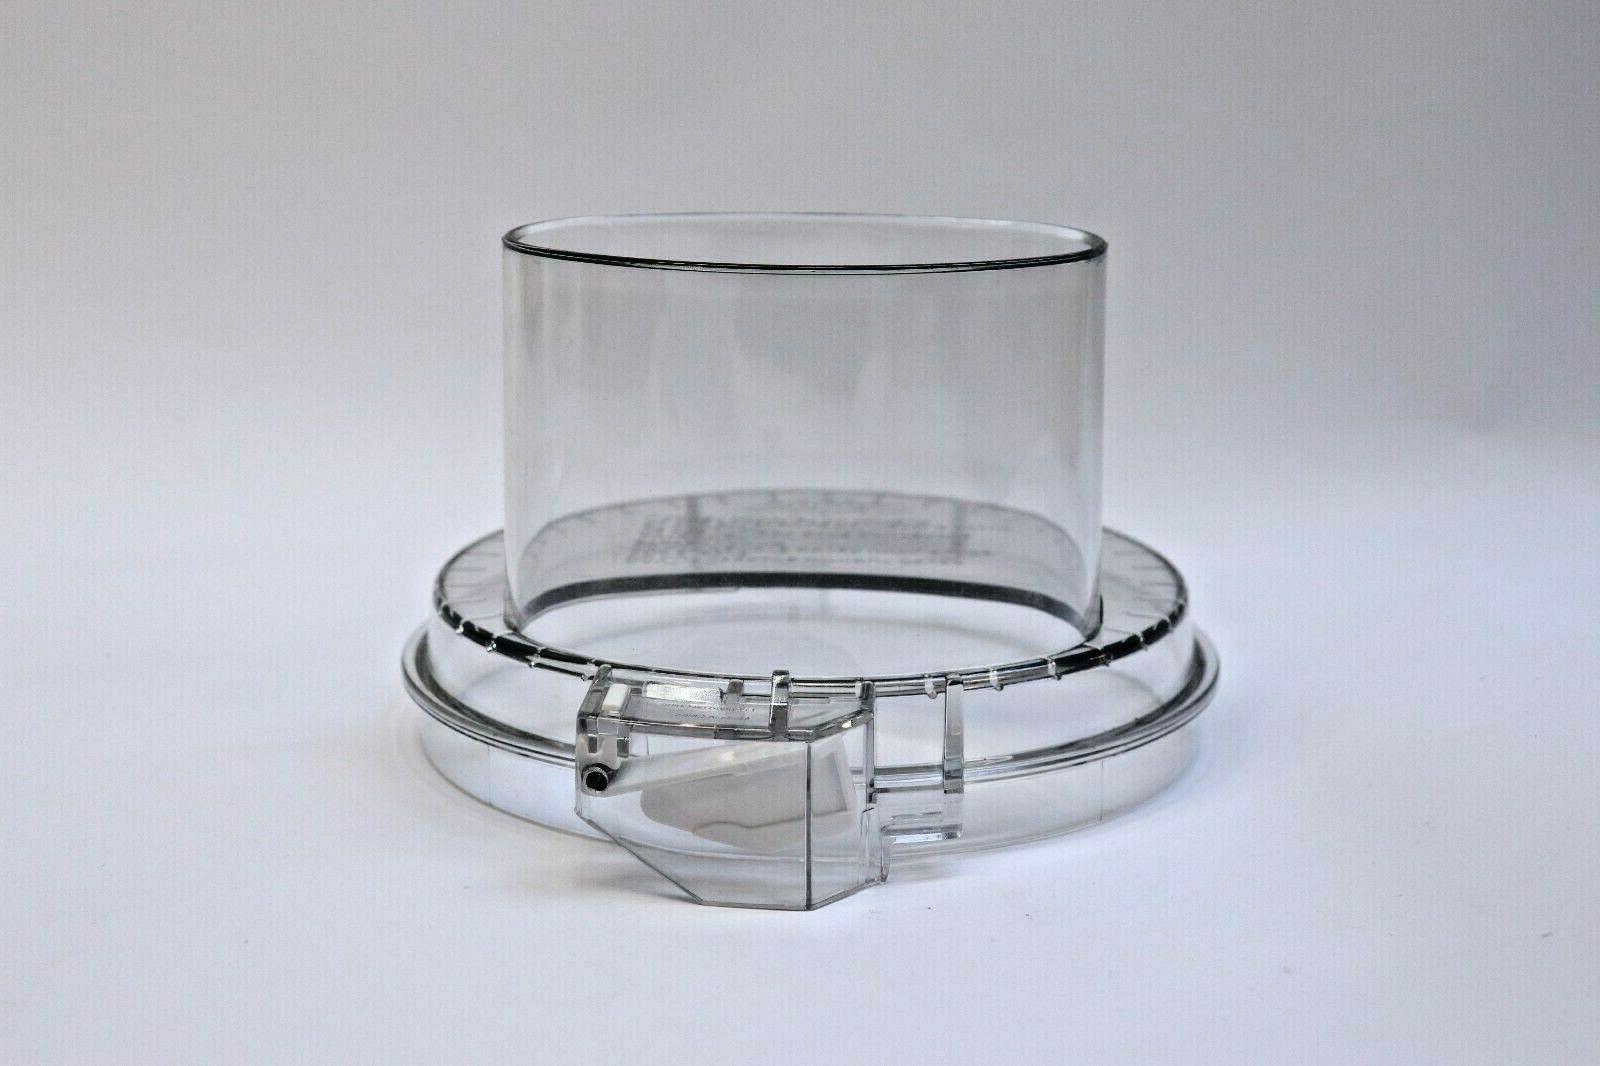 How To Take Apart Cuisinart Food Processor Lid